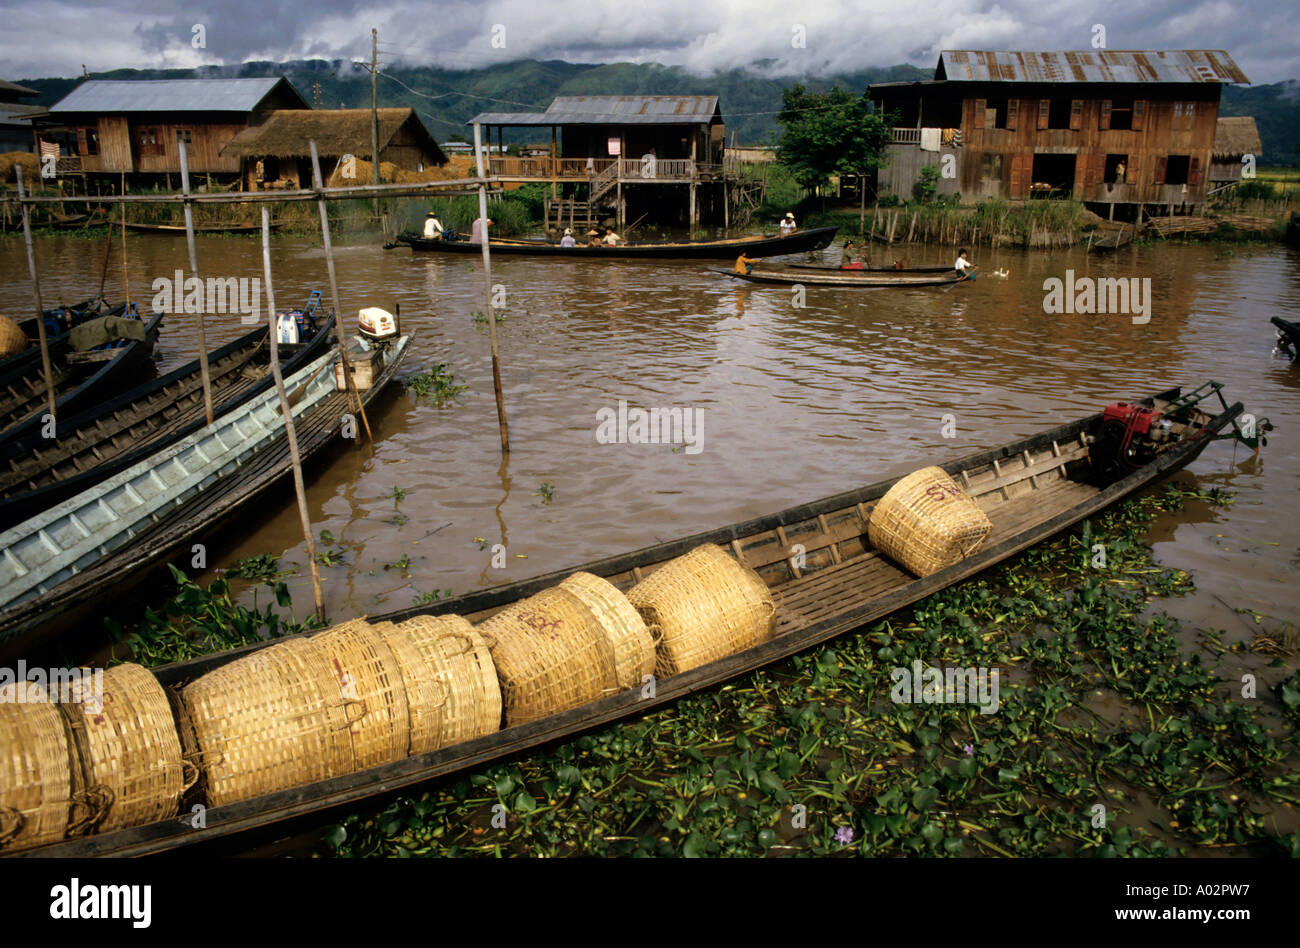 Houses and traditional boats loaded with empty wicker baskets, Inle Lake, Burma / Myanmar Stock Photo